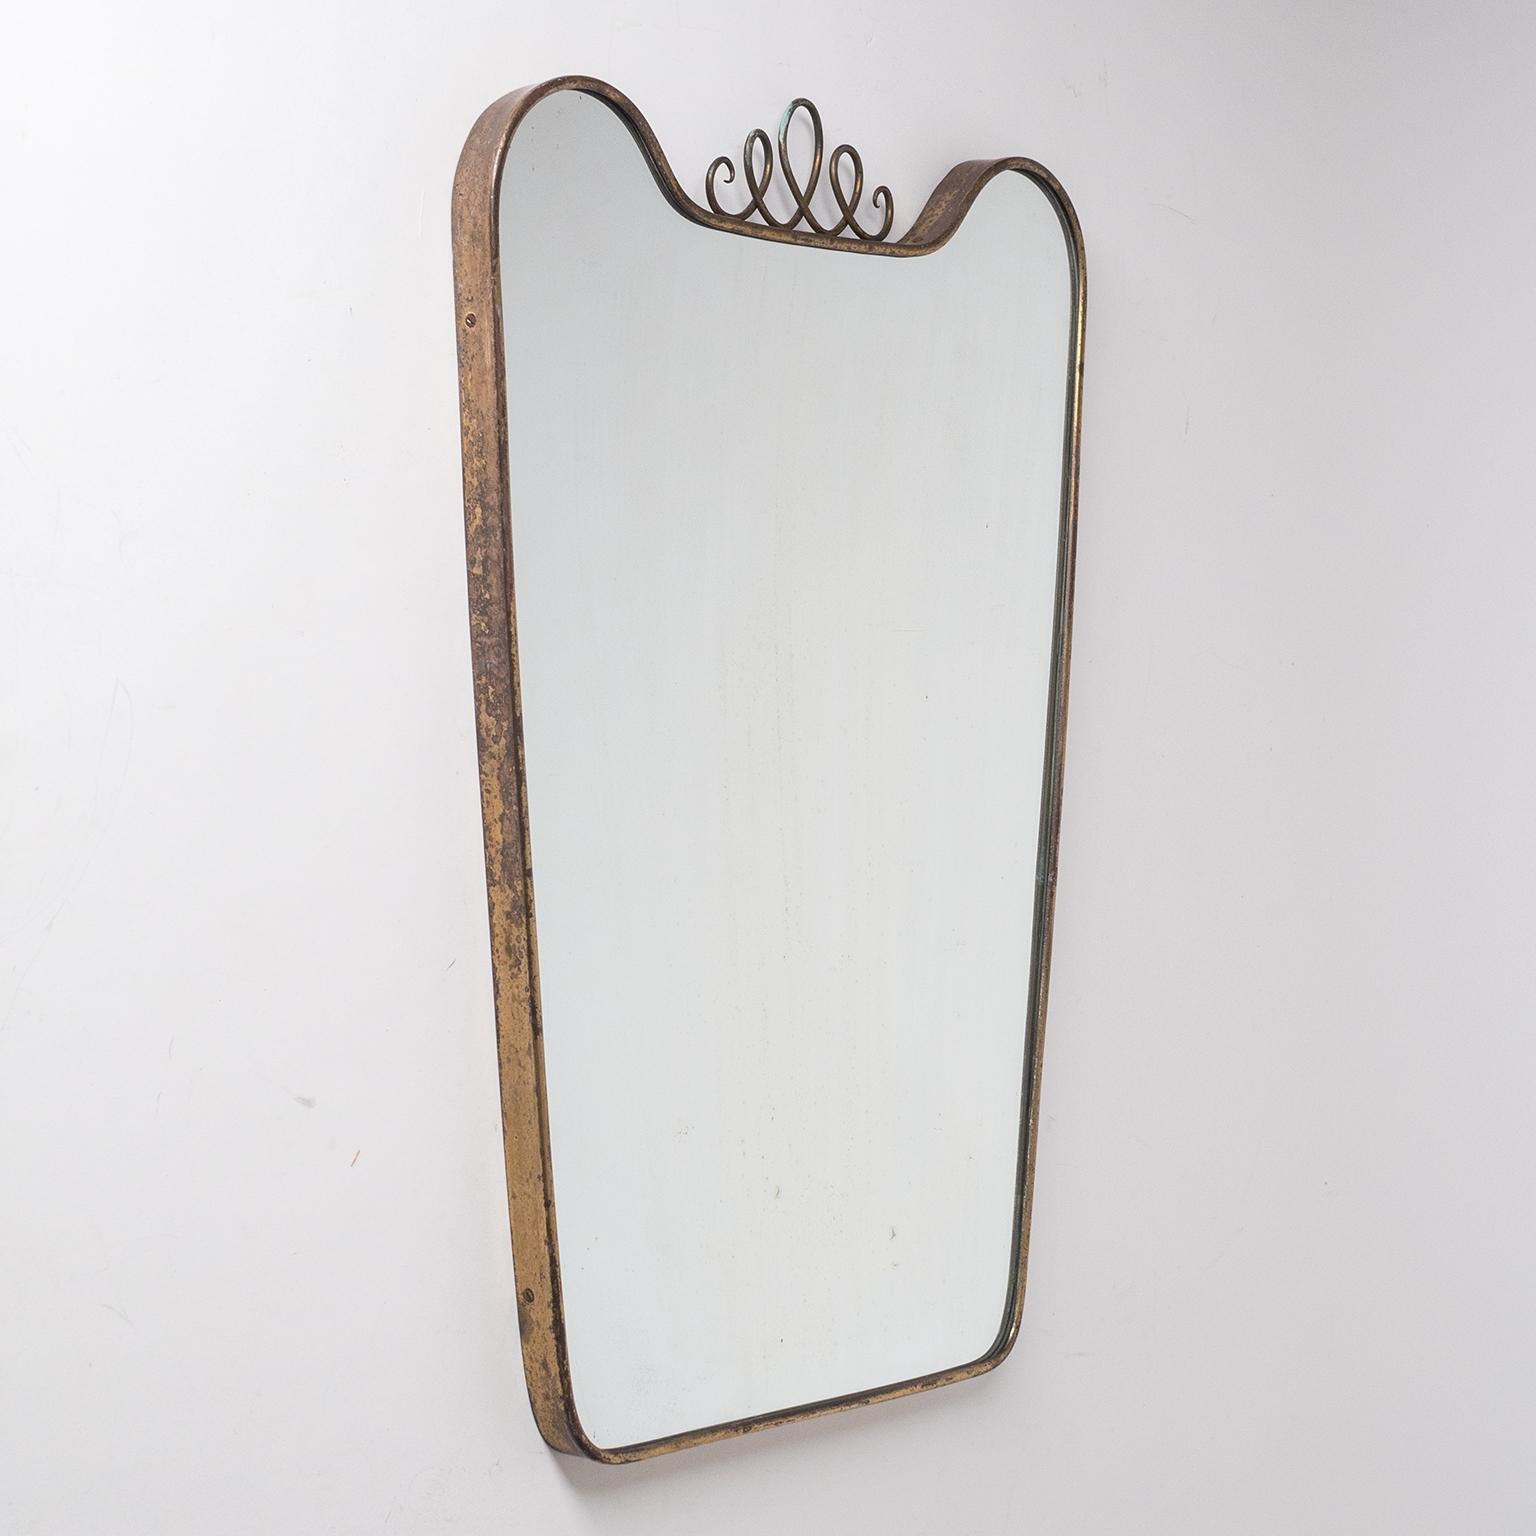 Italian brass mirror from the 1940-1950s. Heavy patina on the brass and mirror (steaks and specks).